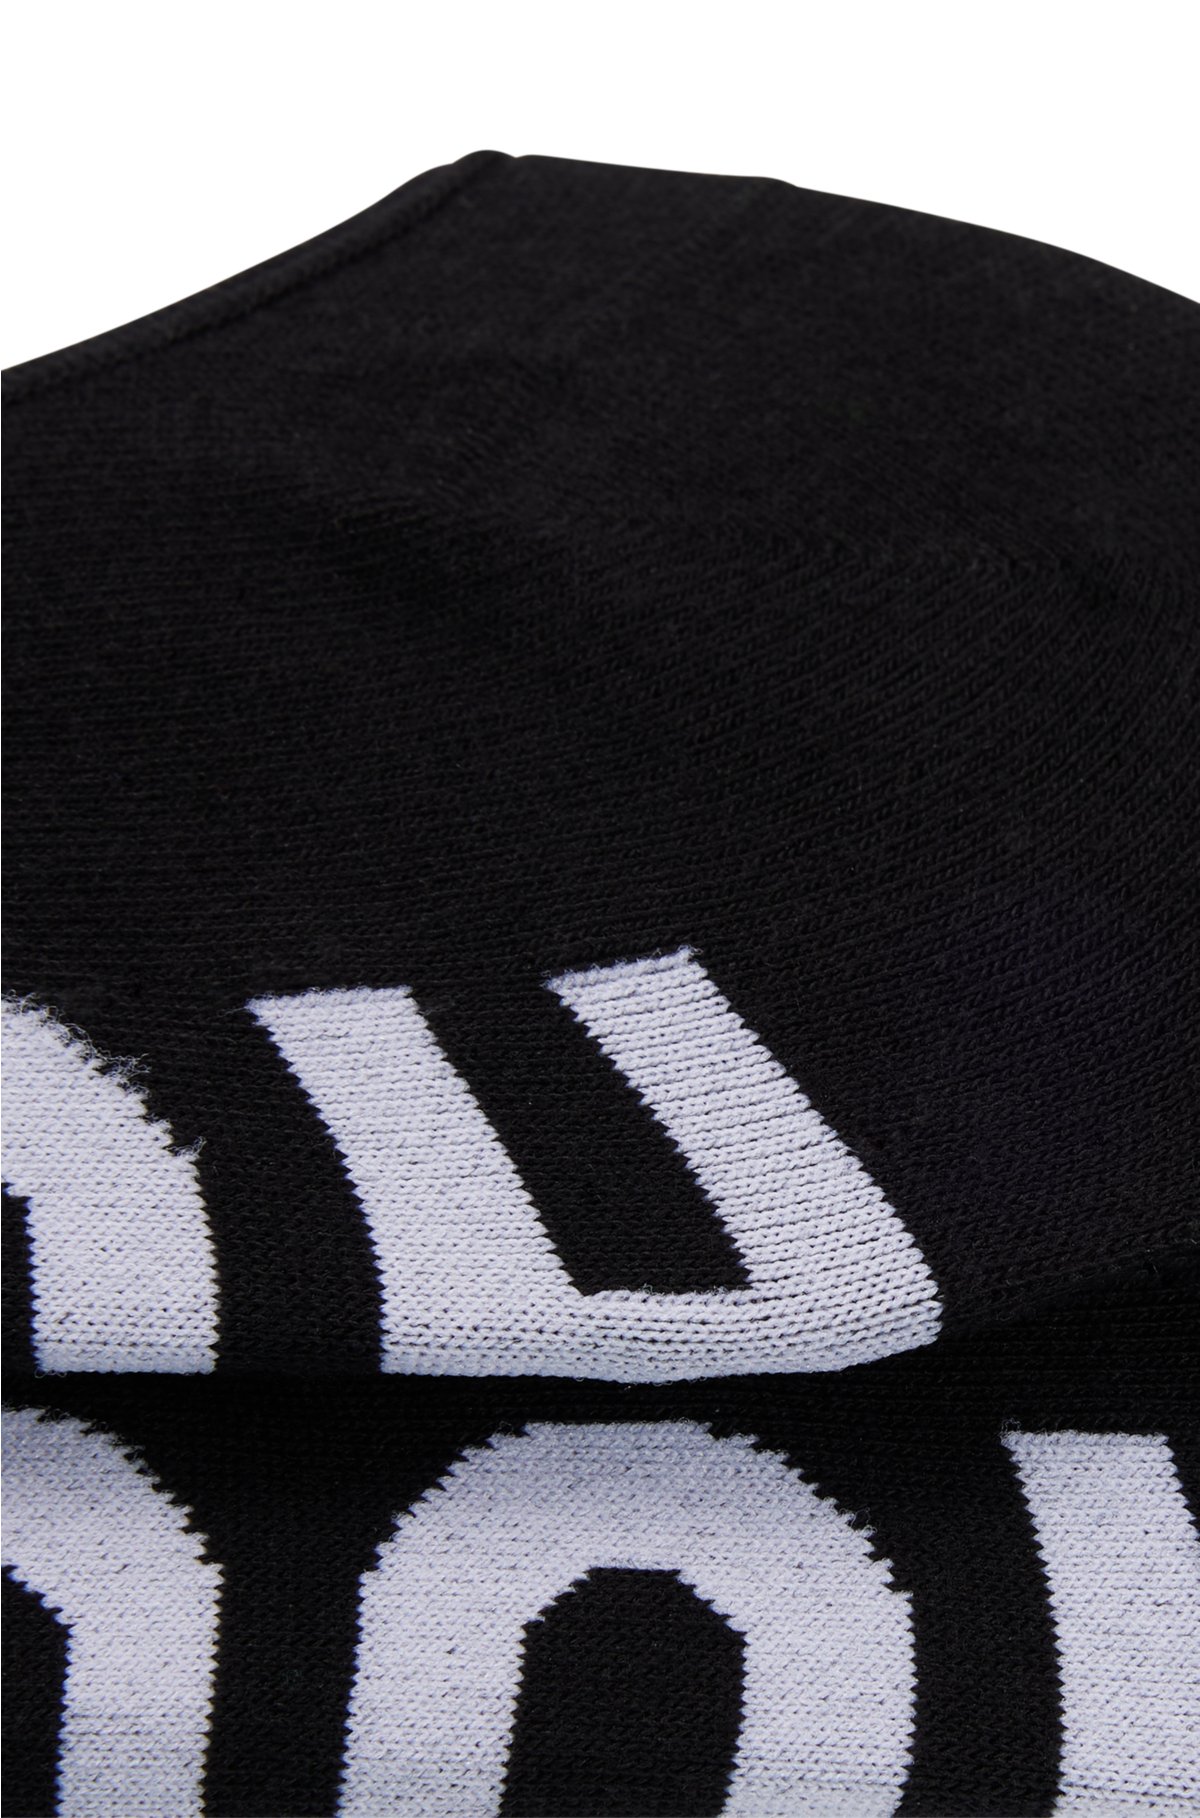 Two-pack of invisible socks with contrast logos, Black